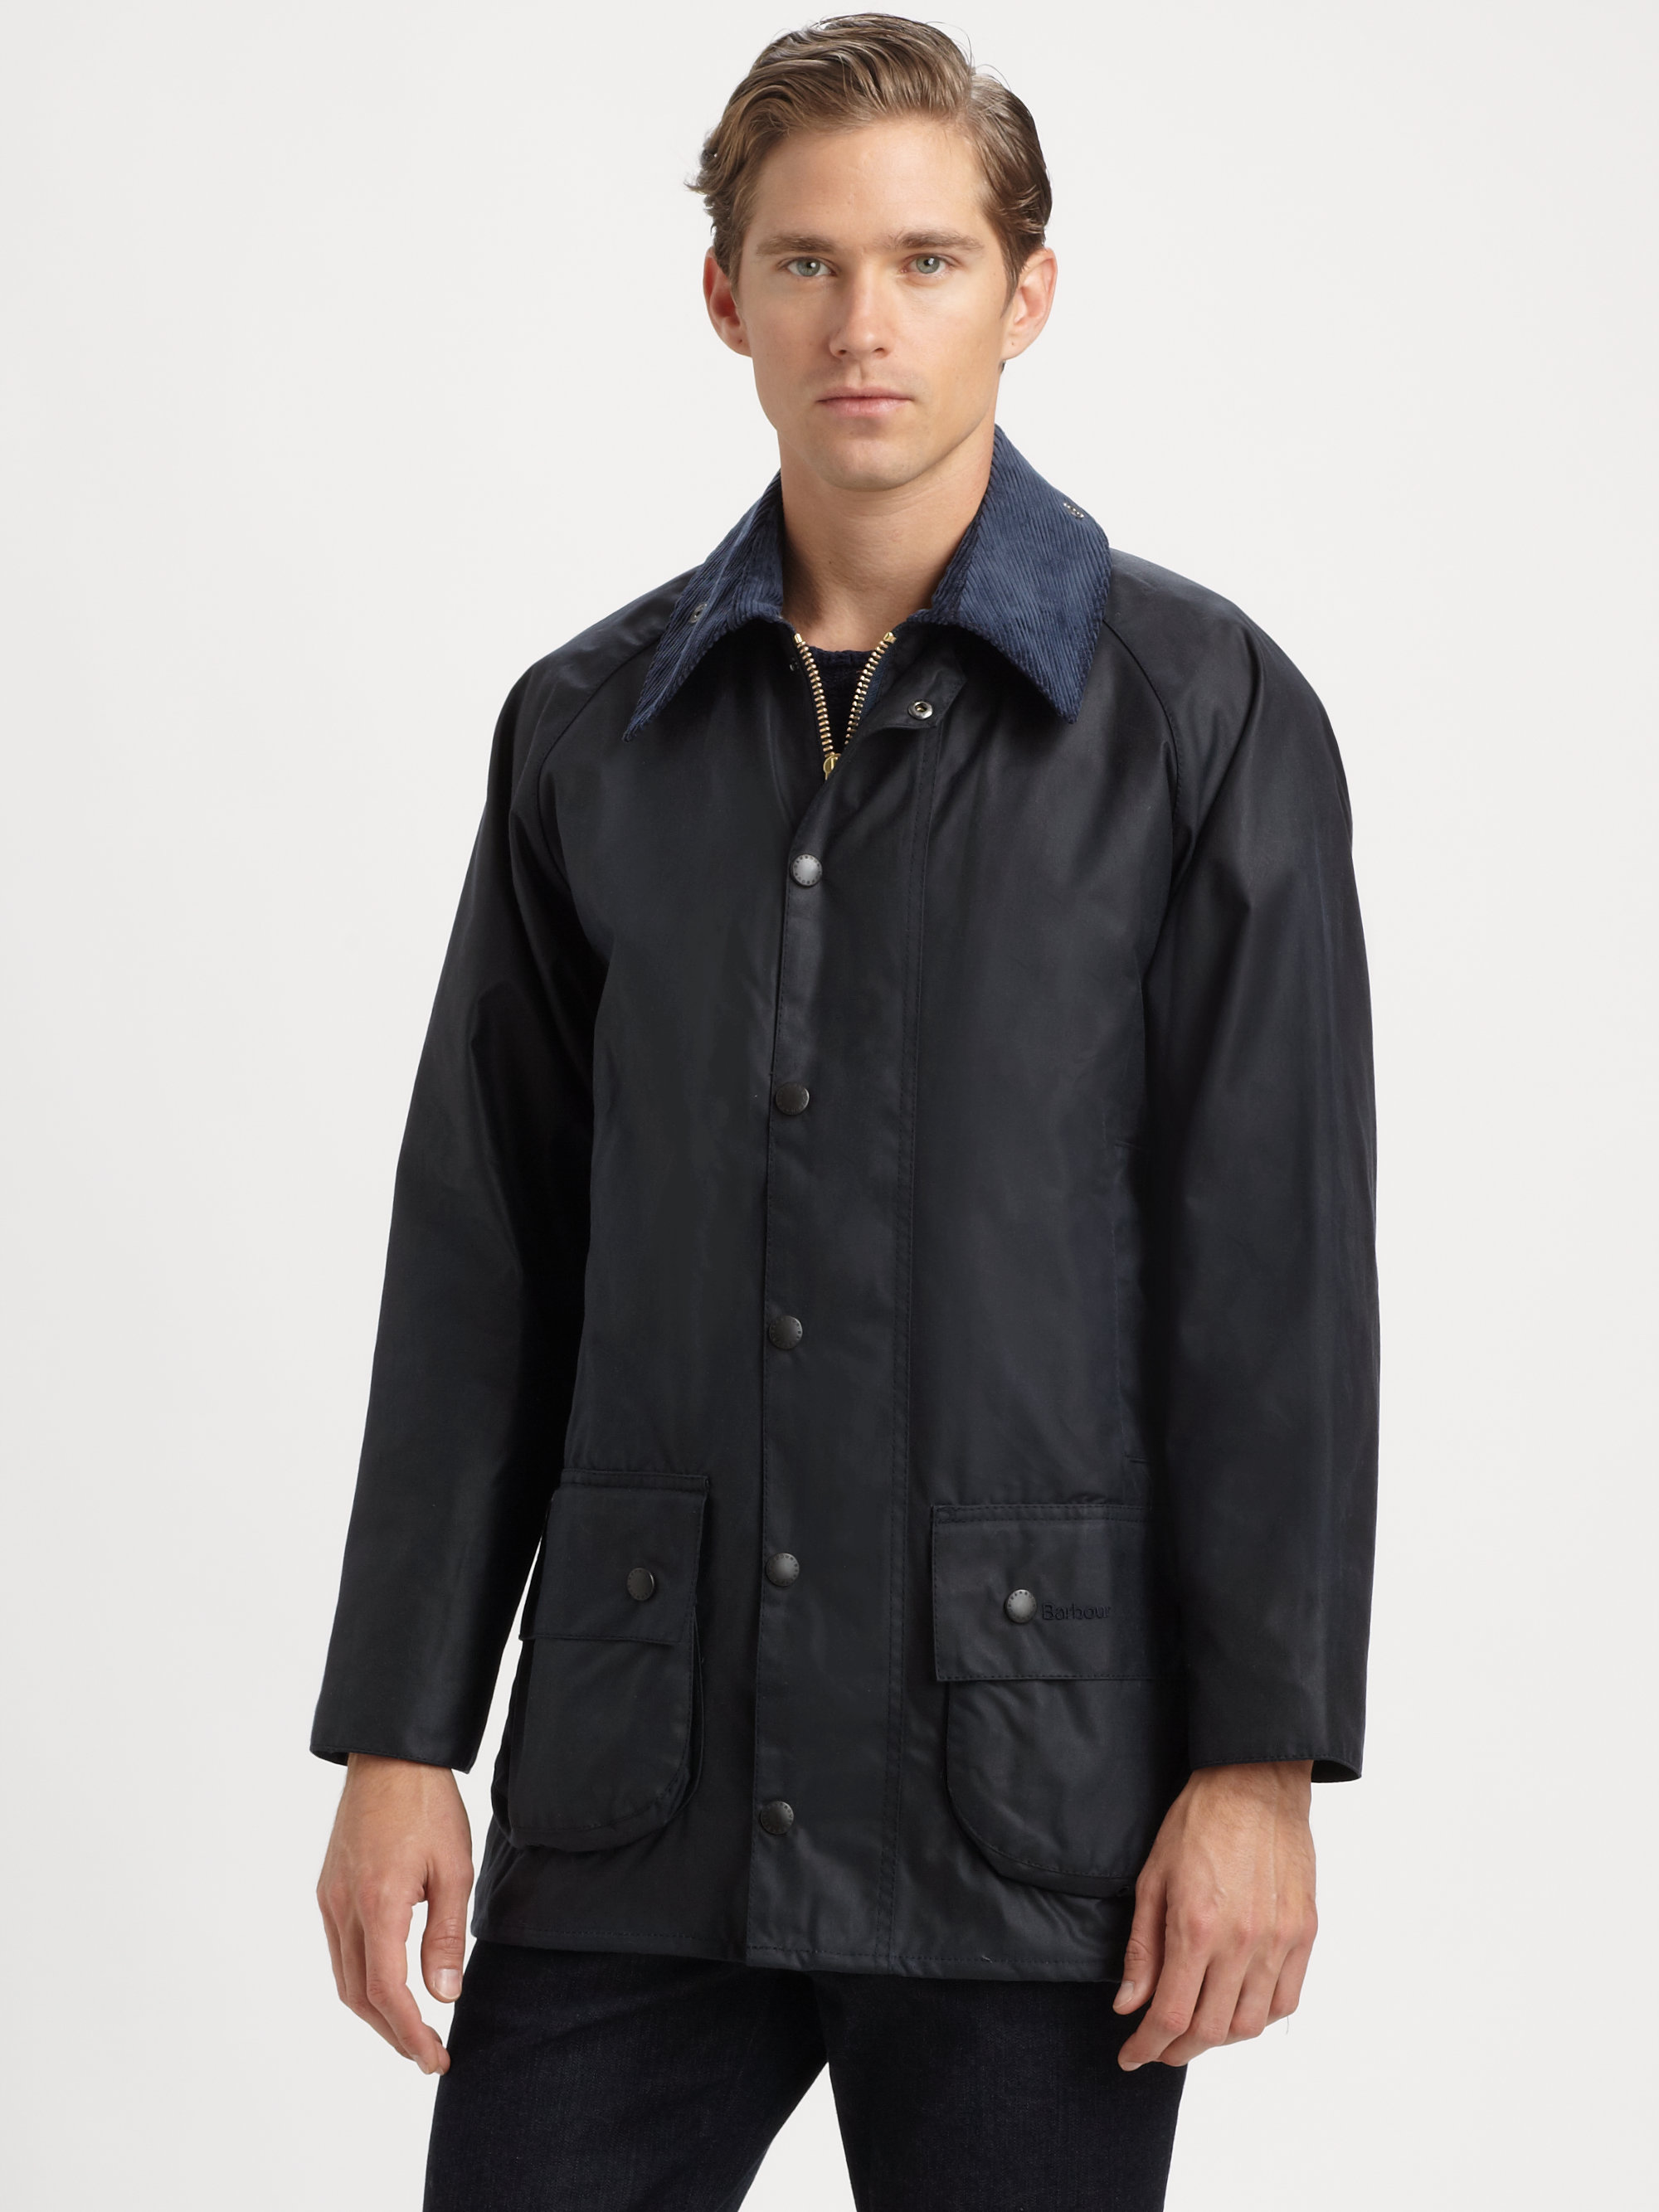 Lyst - Barbour Beaufort Waxed Cotton Jacket in Blue for Men